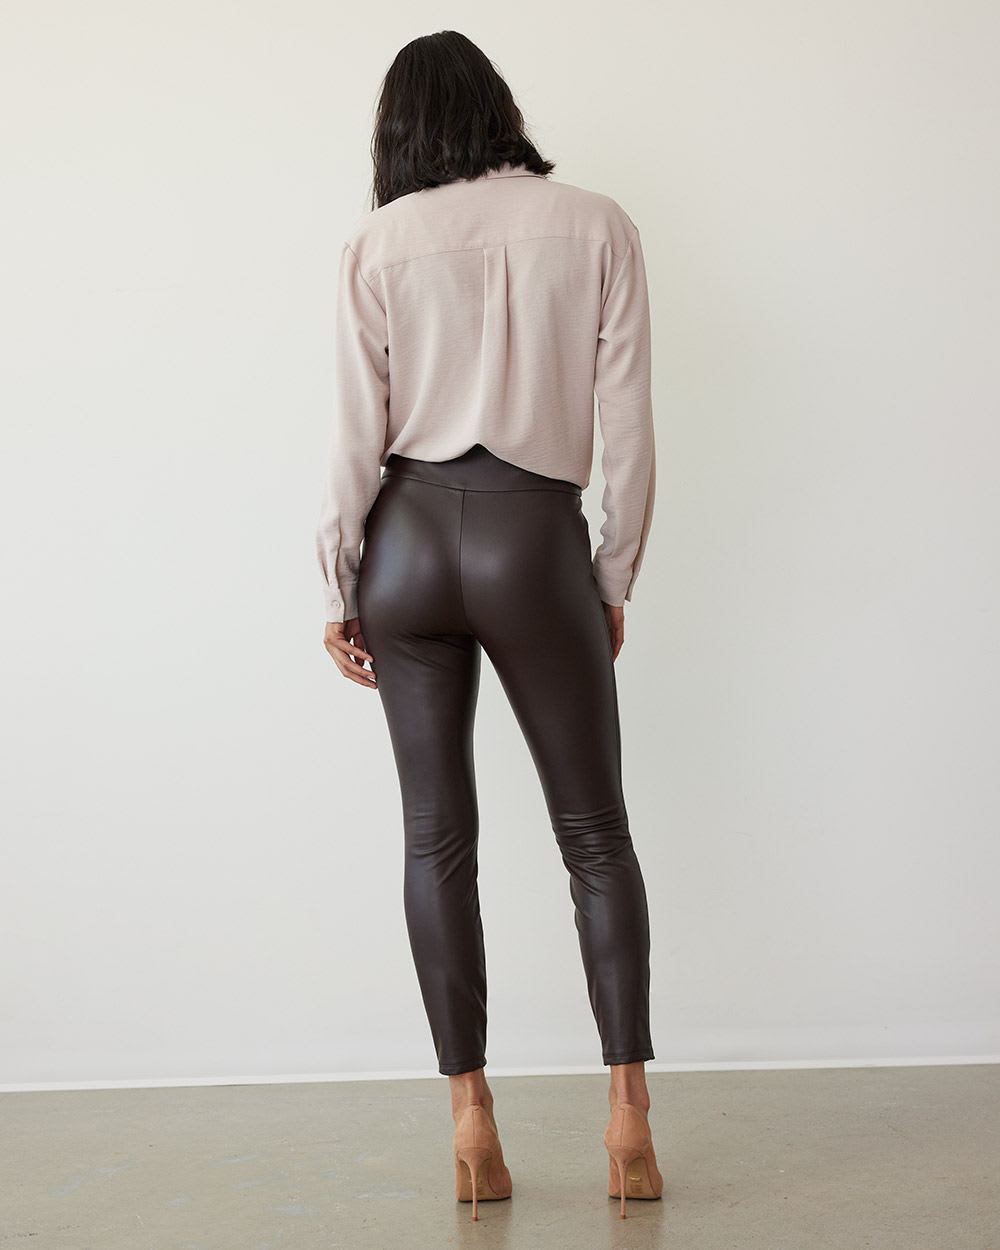 Black Faux Leather Cargo Pants  Leather leggings look, Causal chic  outfits, Black leather pants